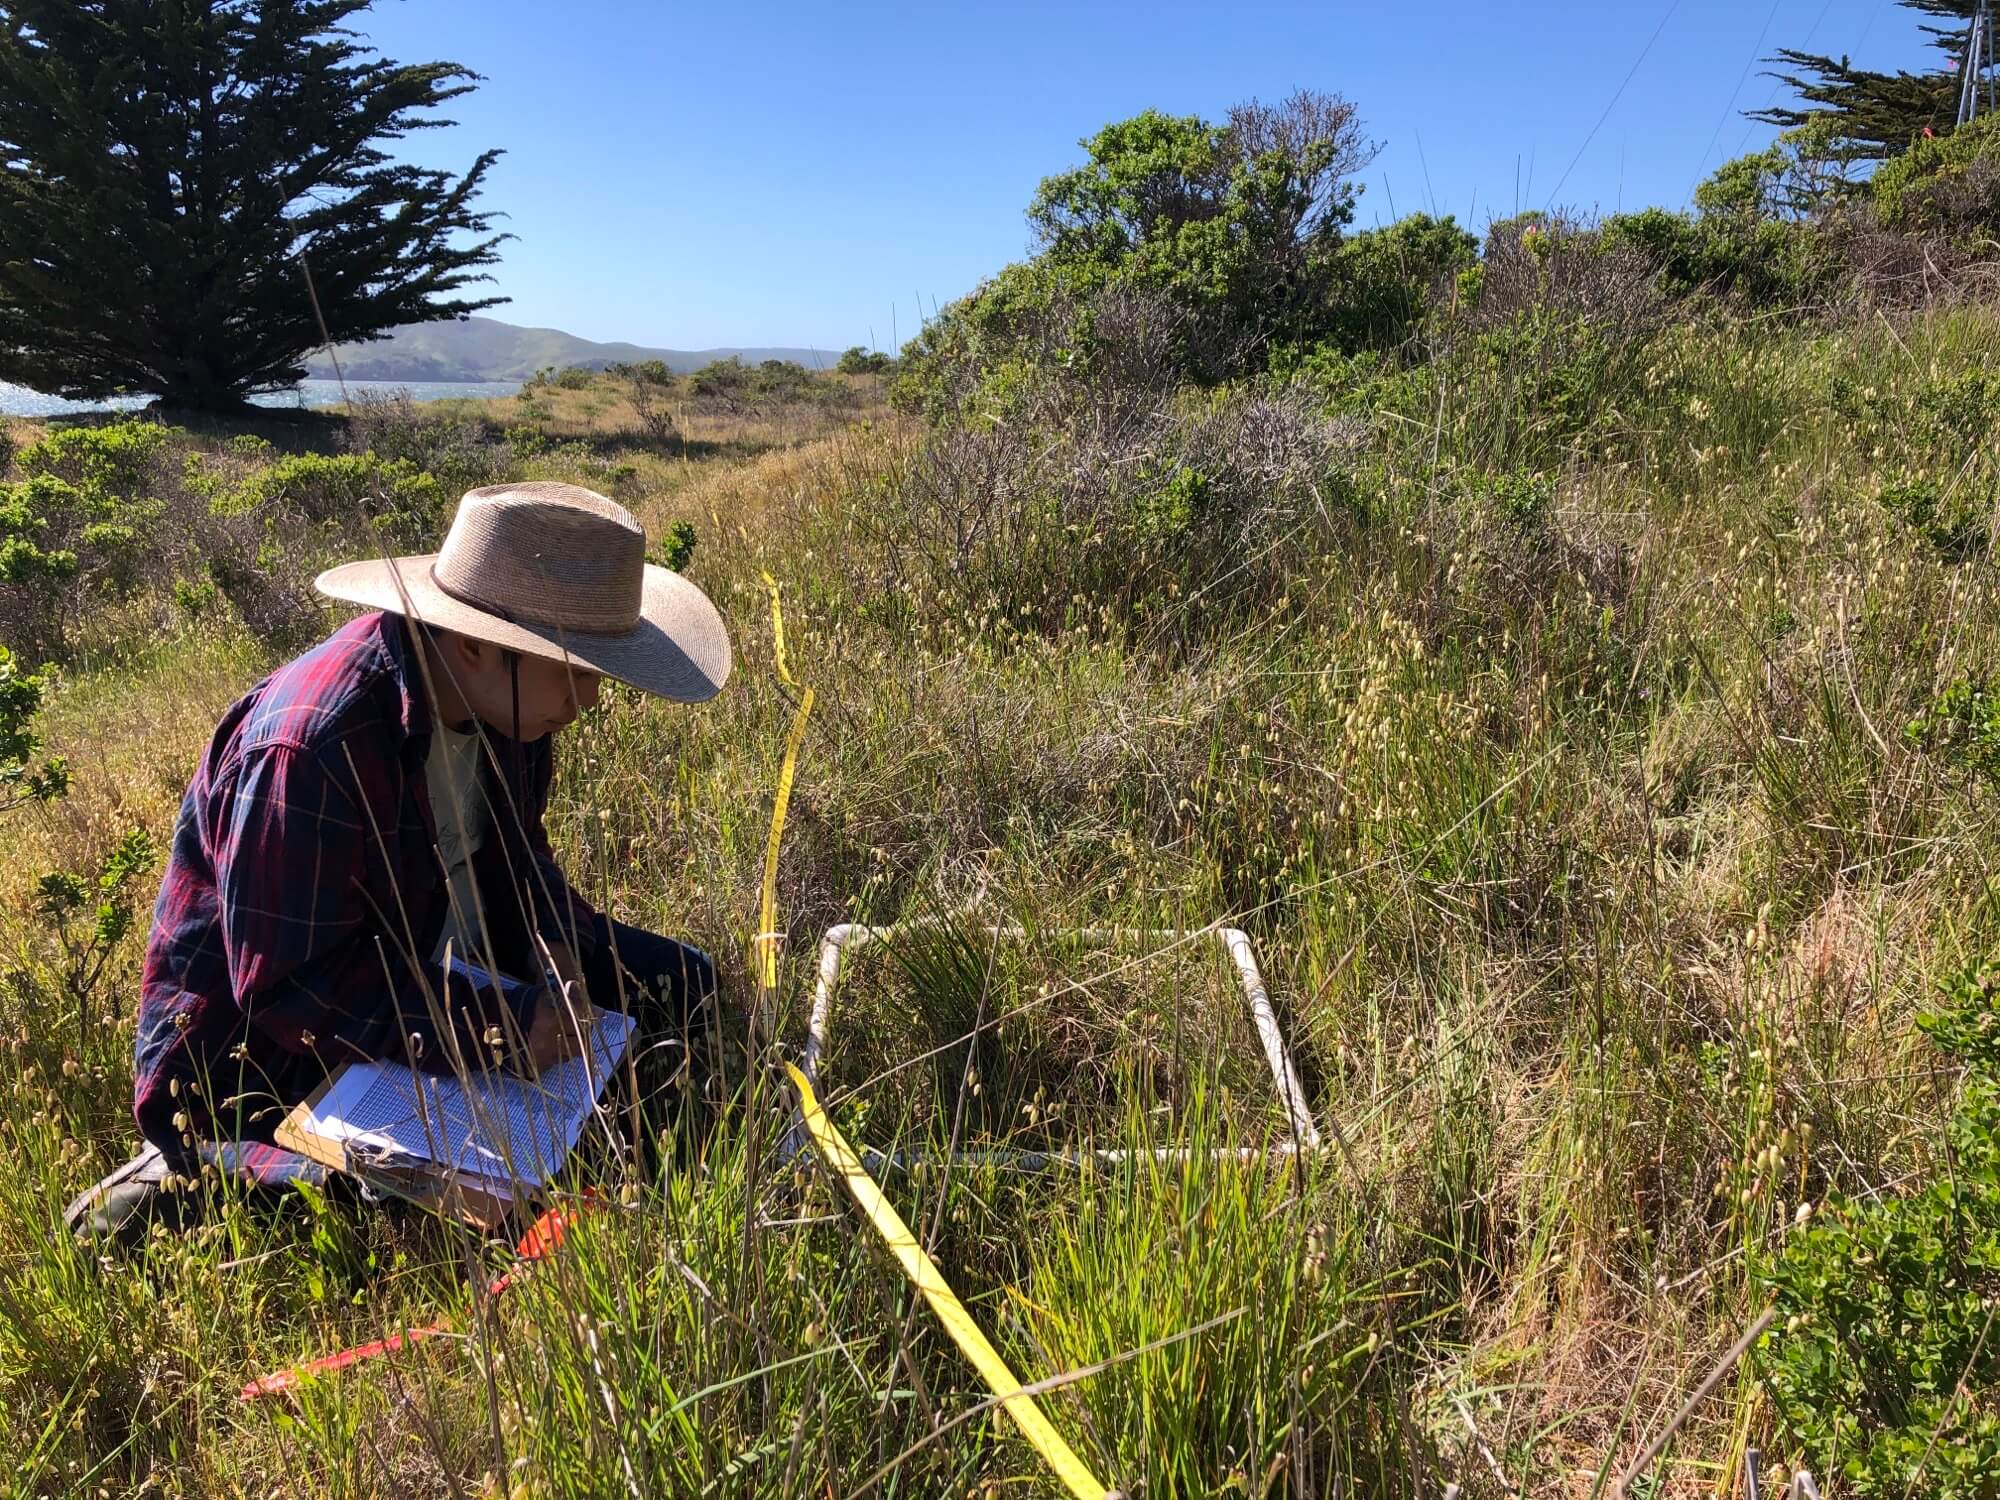 Professor Justin Luong conducts research in a grassland area